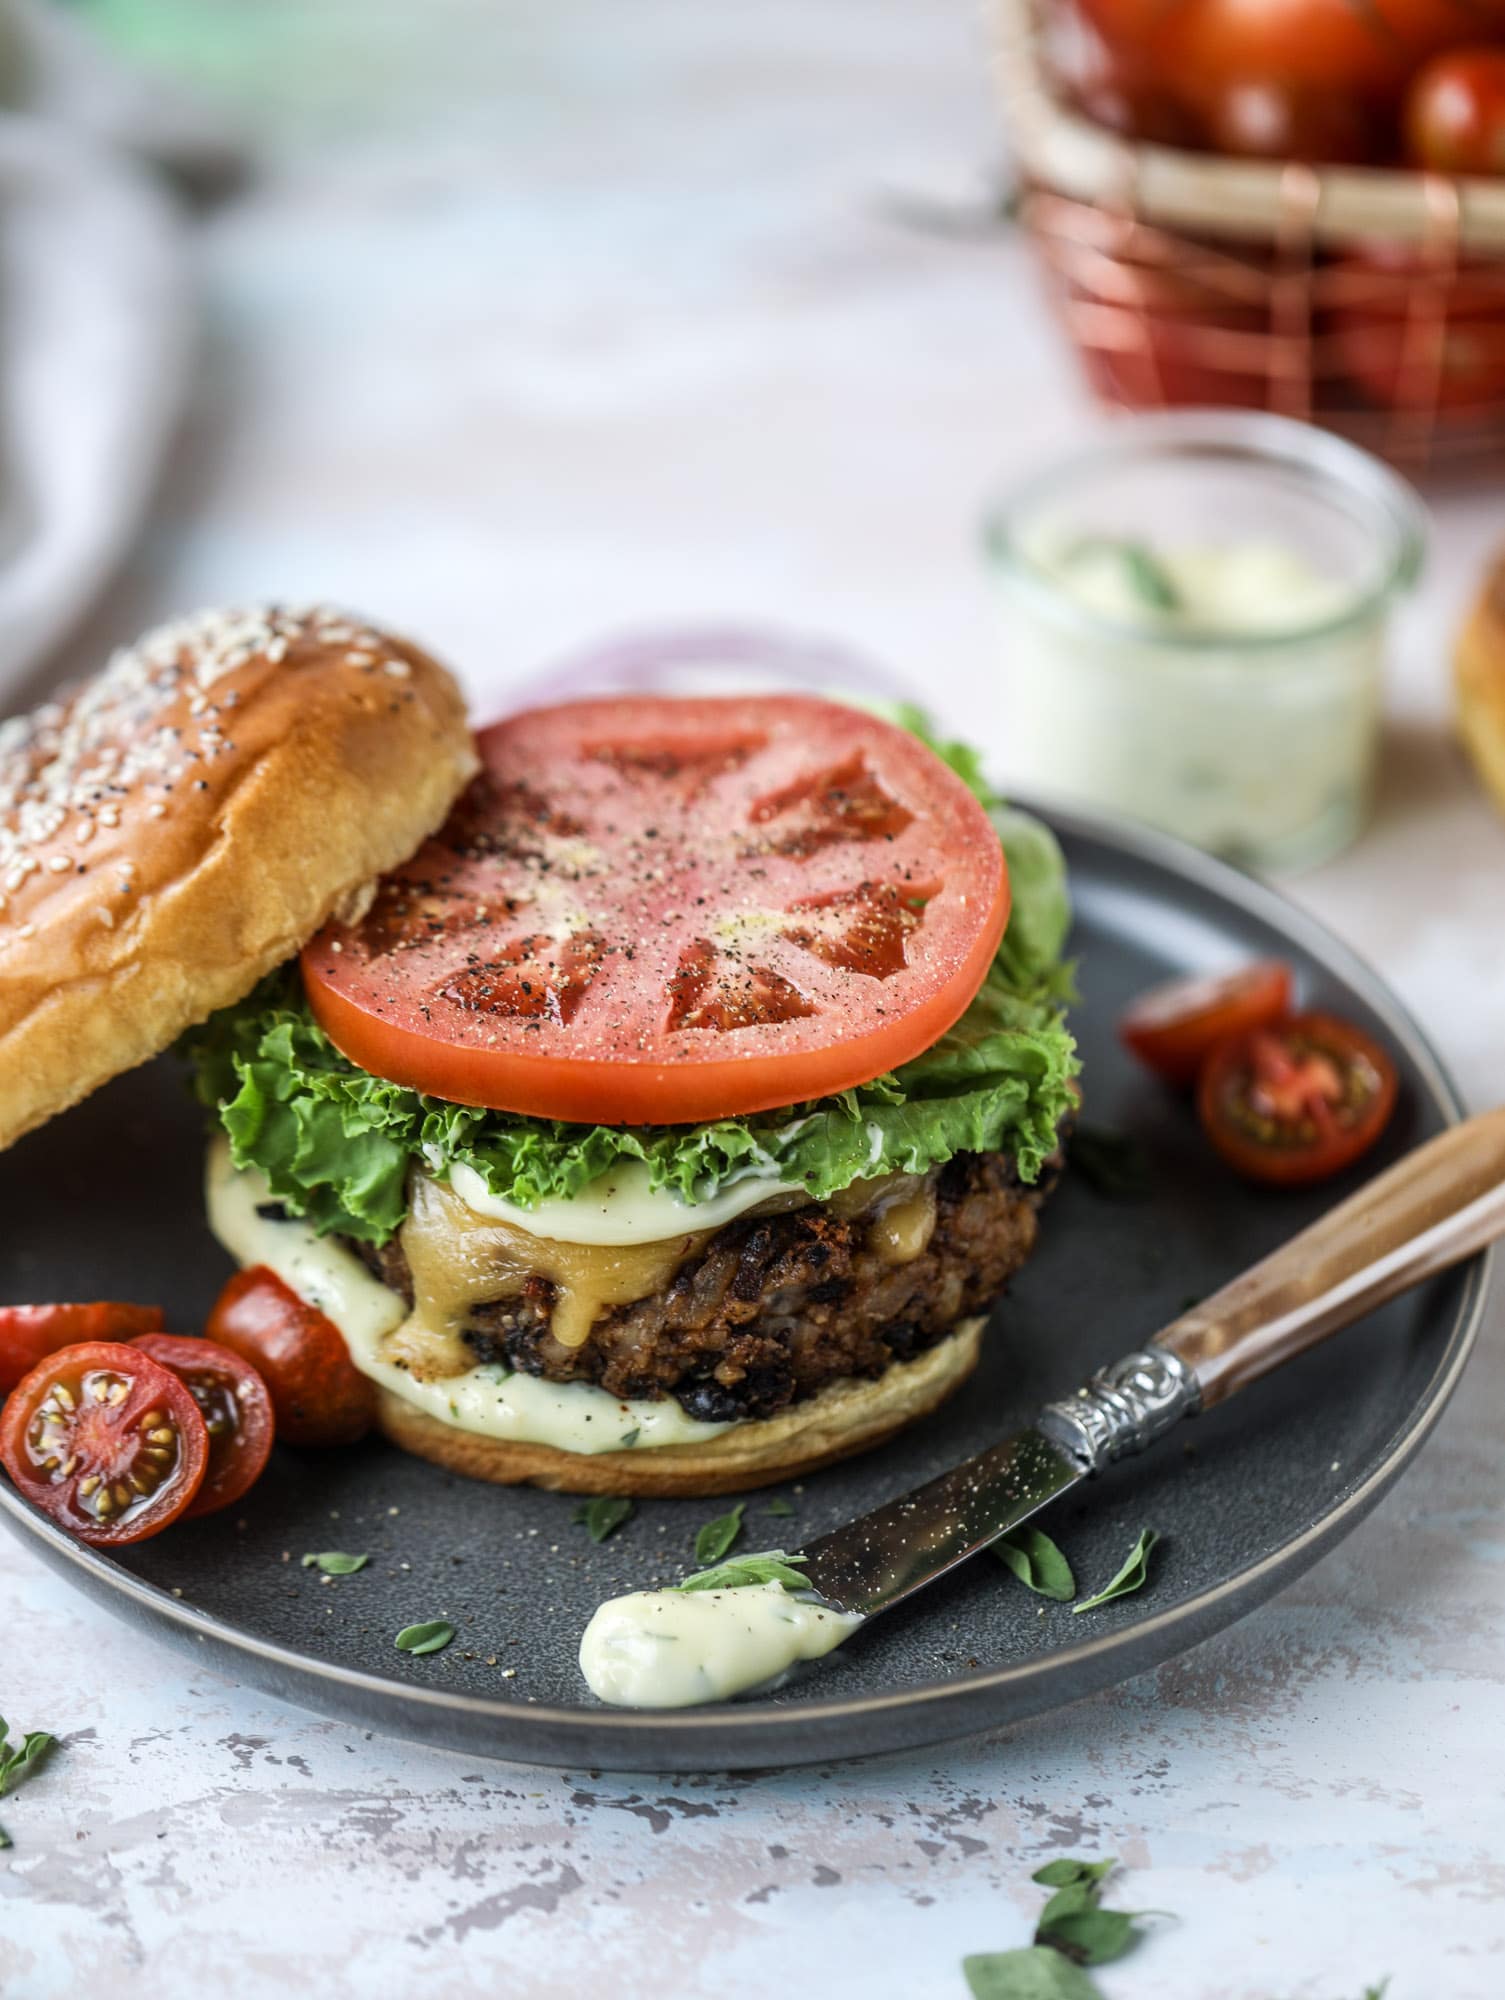 This is the best ever veggie burger and that is not an exaggeration! It's delicious, full of texture and chew, super satisfying and actually sticks together in the pan. You can serve it on buns, make a patty melt, a salad or lettuce wraps - perfection! I howsweeteats.com #best #veggie #burger #vegetarian #beans #quinoa